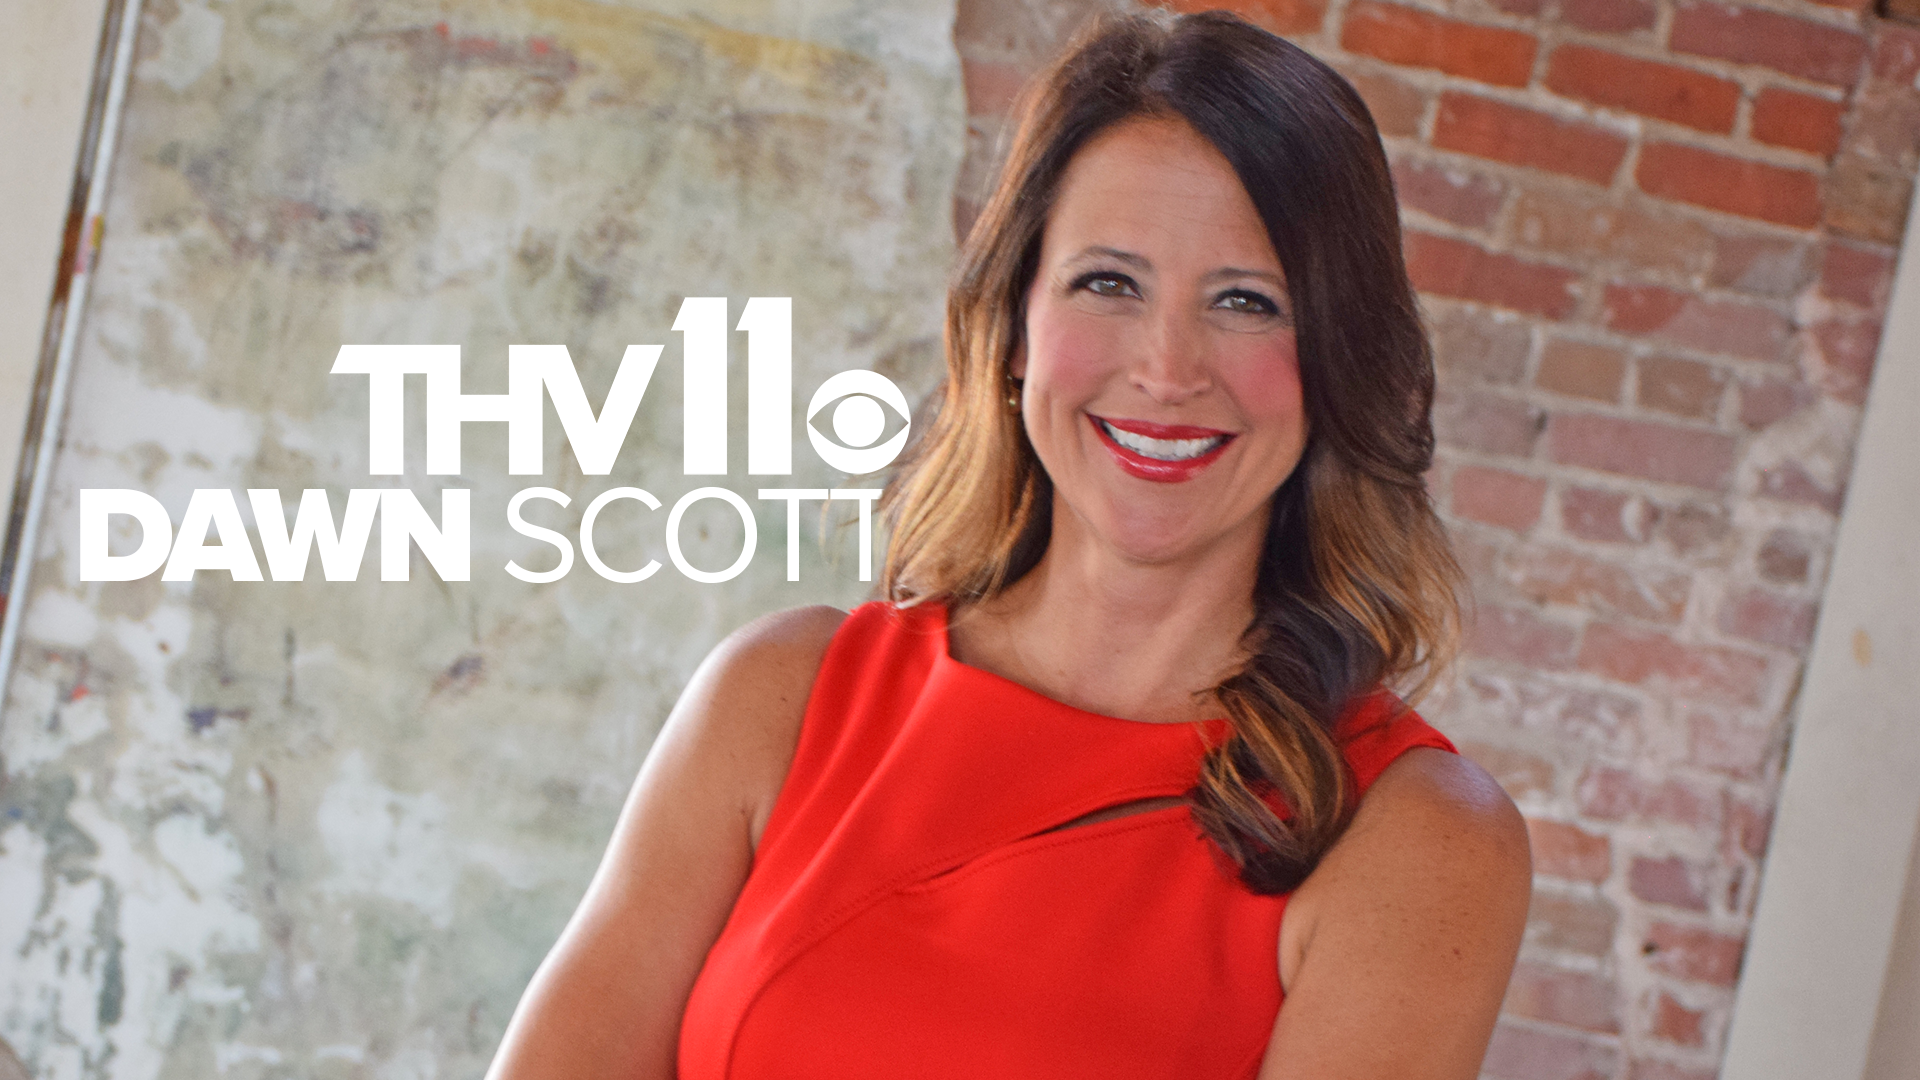 Longtime anchor and storyteller Dawn Scott will step down from the nightly anchor desk, allowing her to have more time to devote to her family.